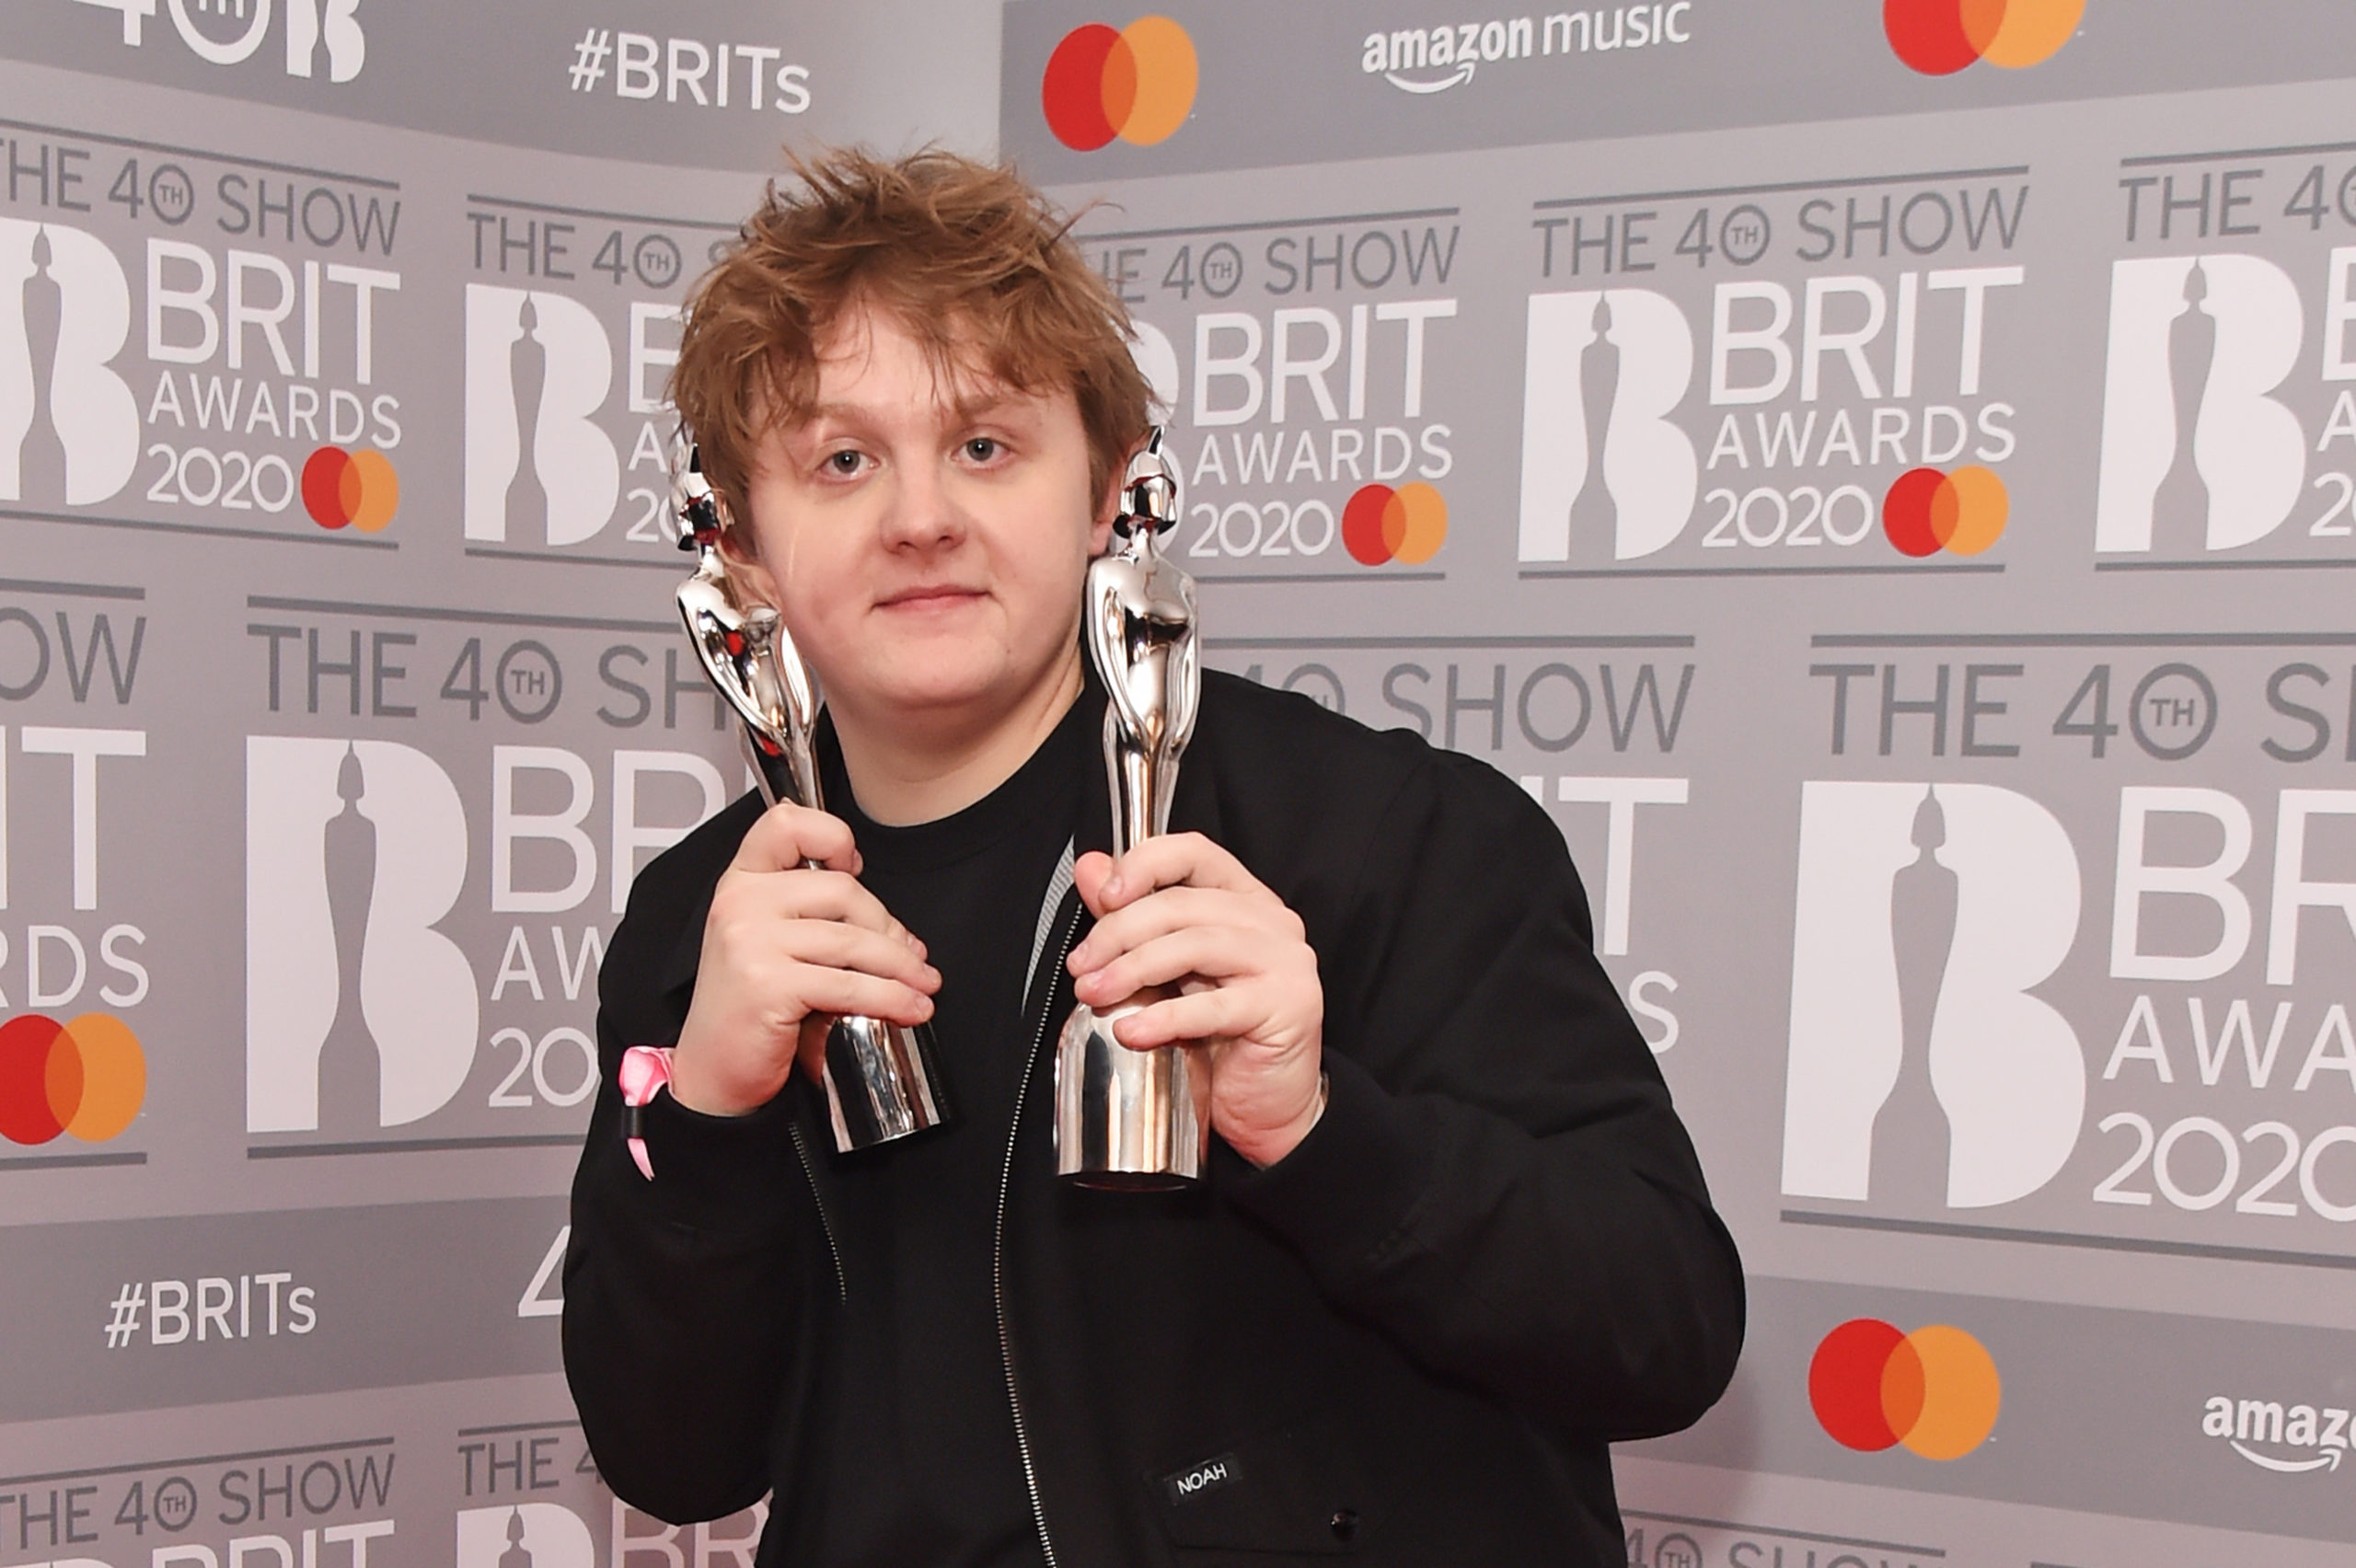 Chart-topper: Brit Award-winner Lewis Capaldi. <strong>GETTY IMAGES</strong>”/><span
class=